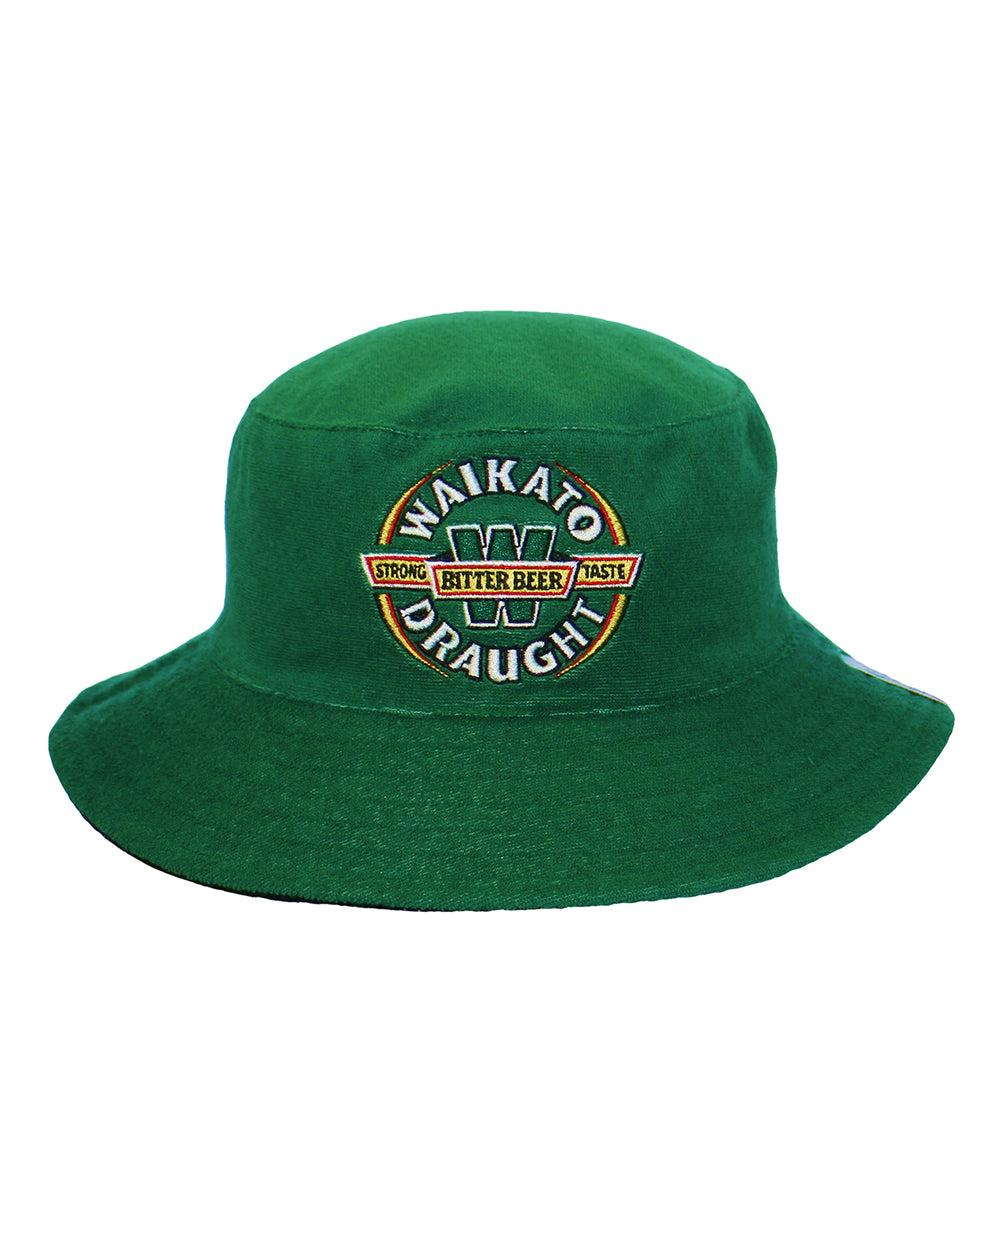 Waikato Draught Bucket Hat -  Beer Gear Apparel & Merchandise - Speights - Lion Red - VB - Tokyo Dy merch